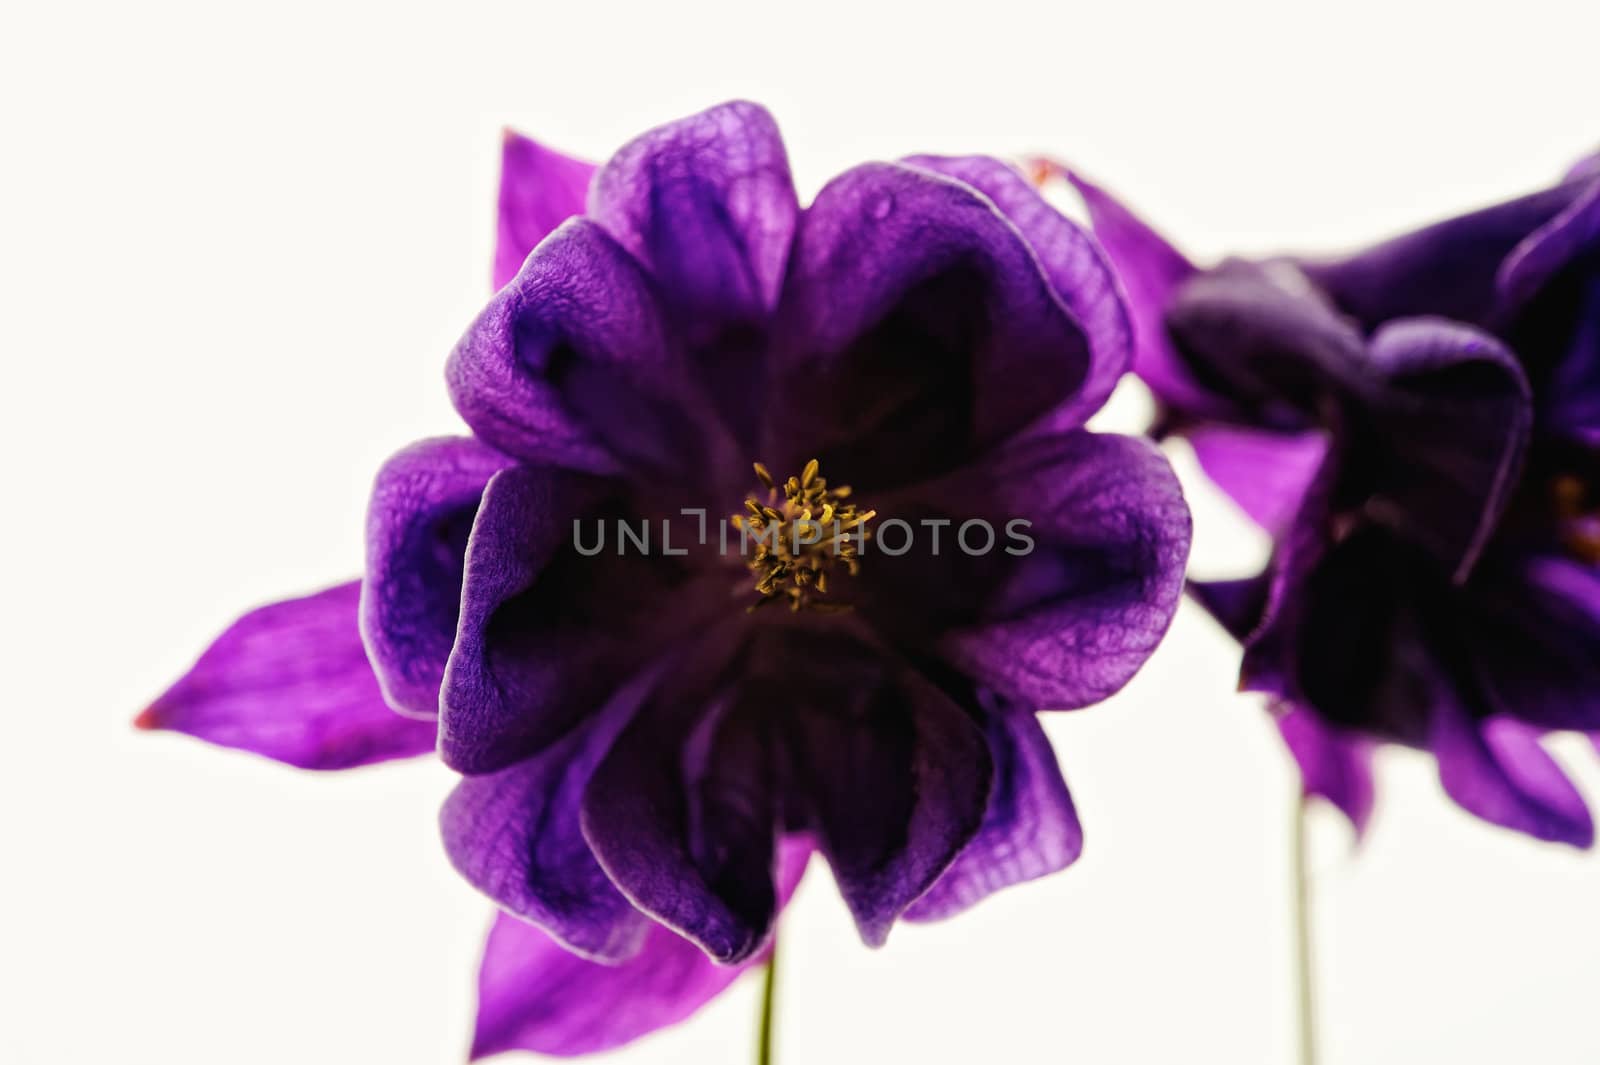 Two violet flowers on a white background